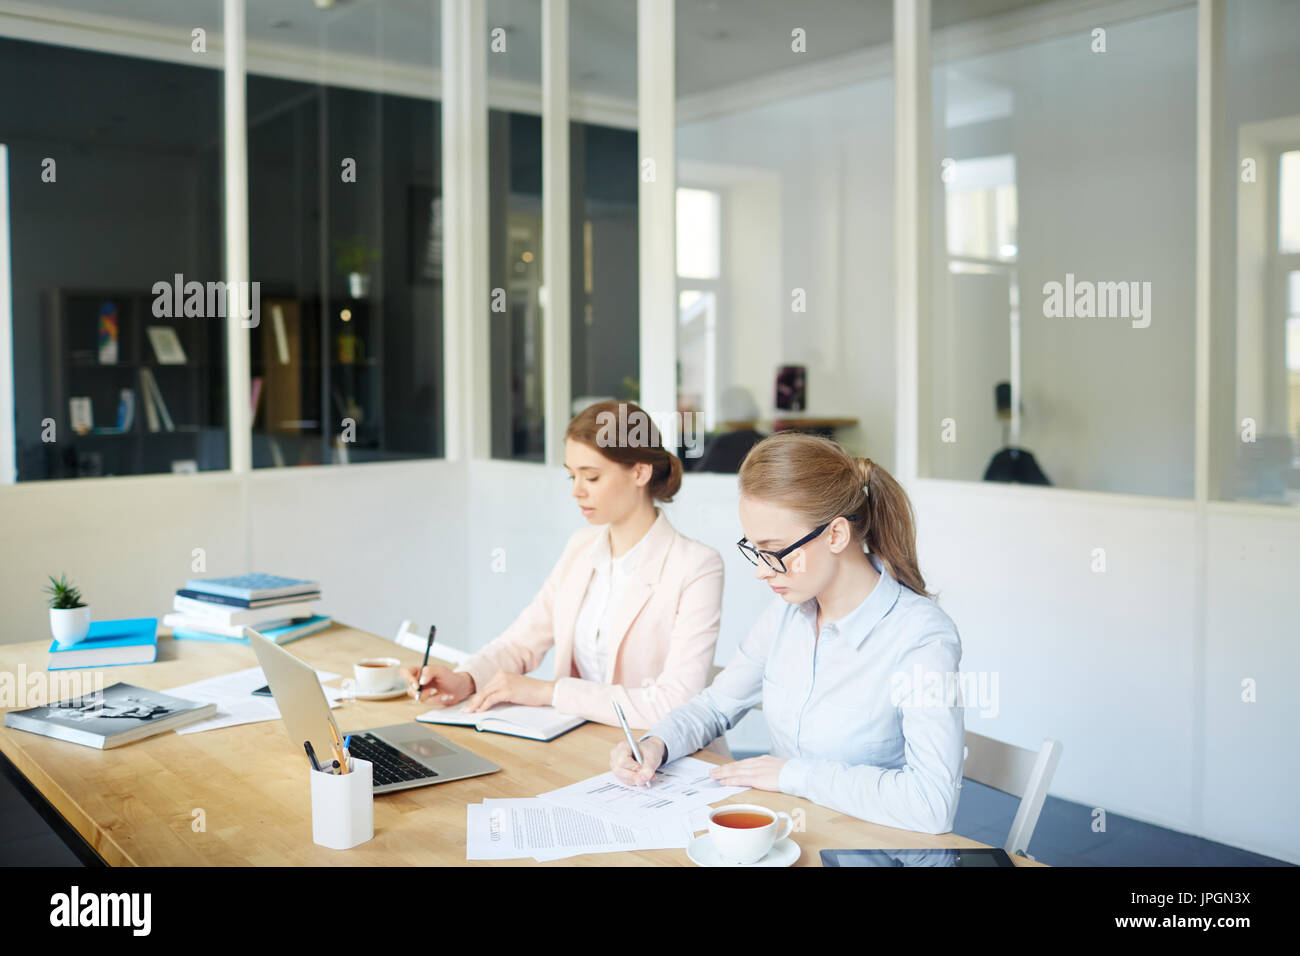 Young economists carrying out written task Stock Photo